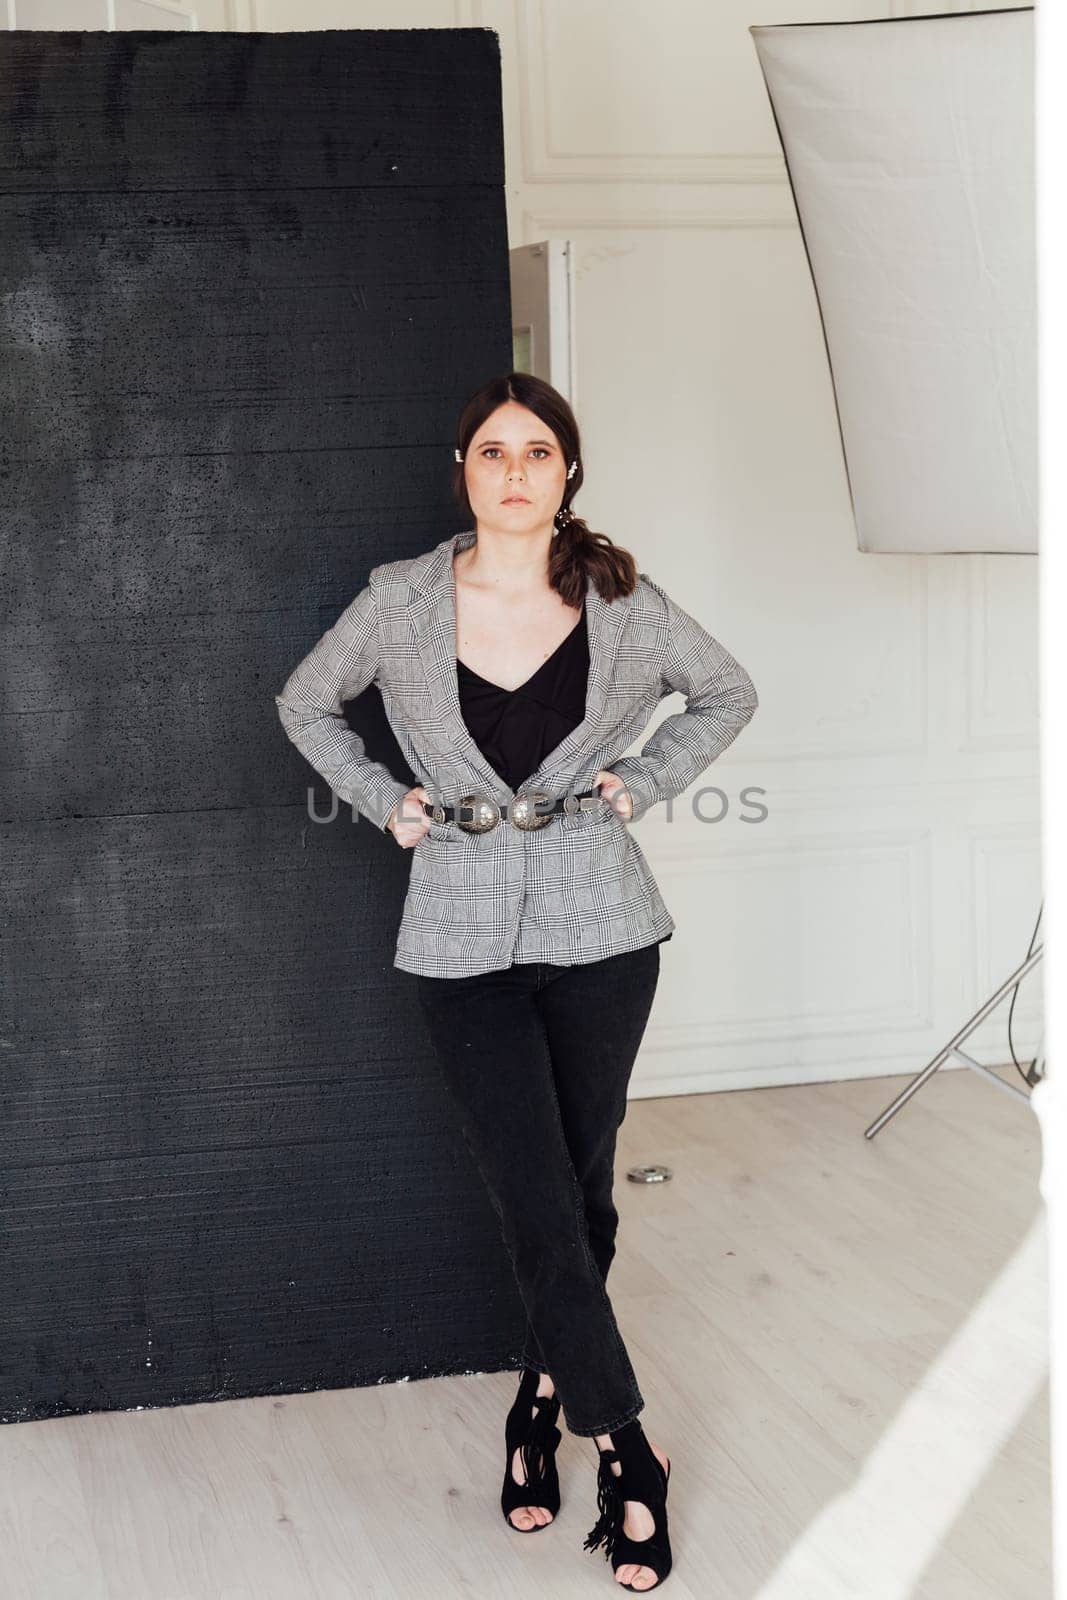 fashionable business woman in jacket on a black and white background